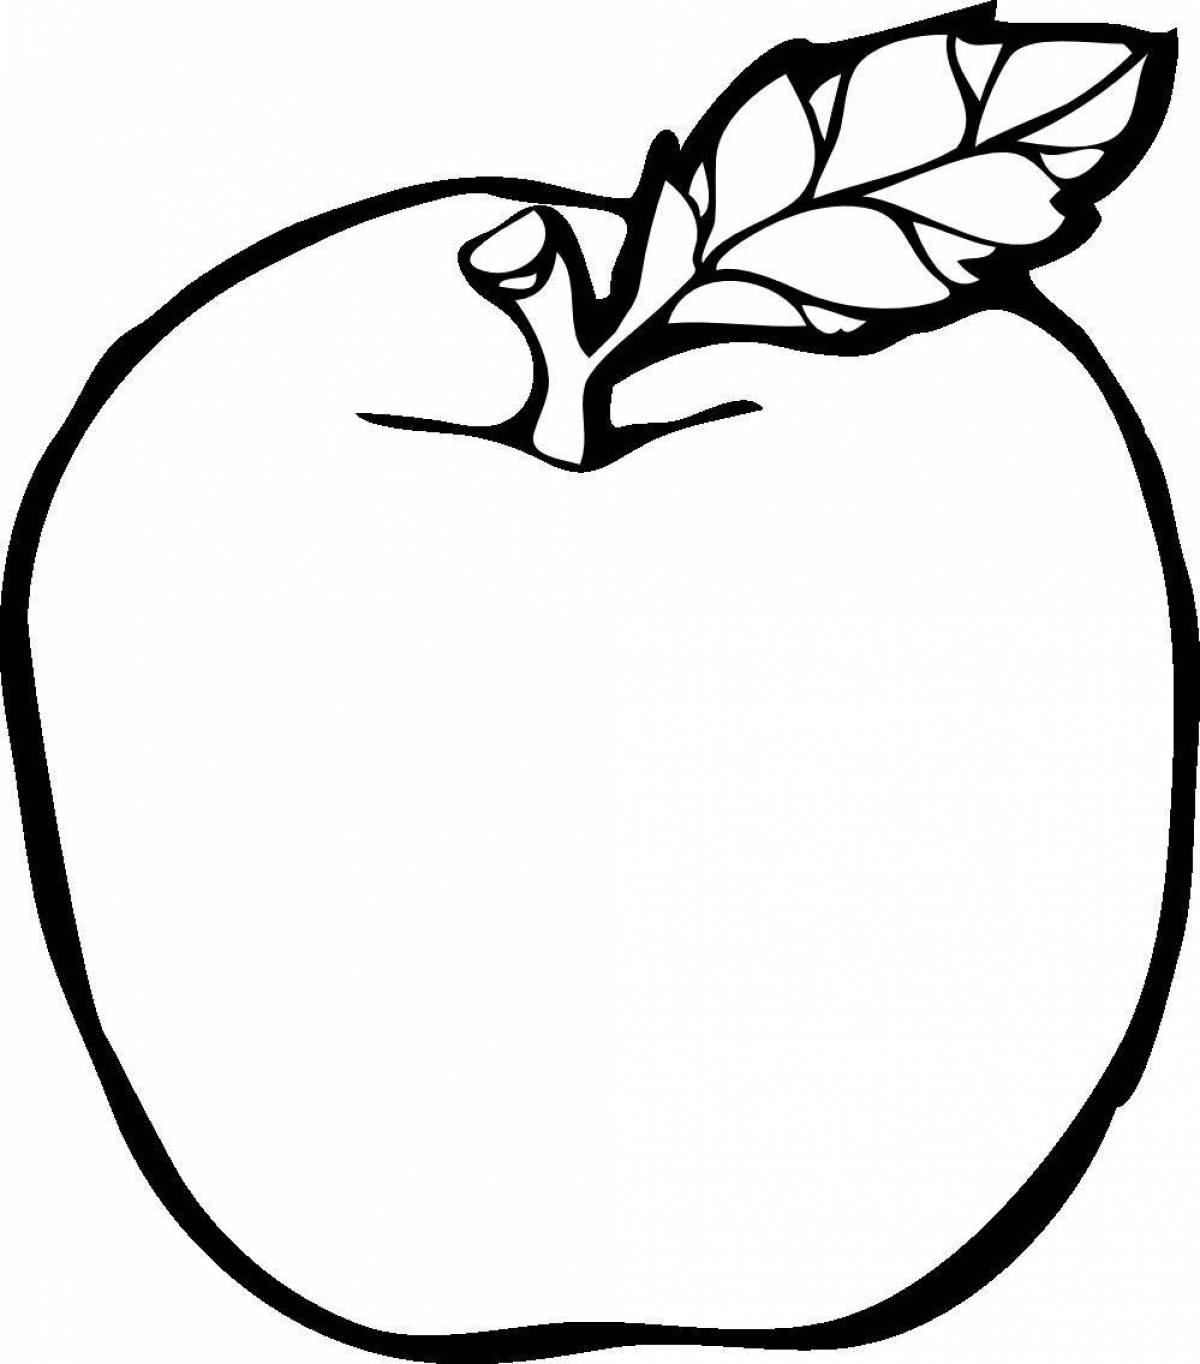 Detail drawing of an apple